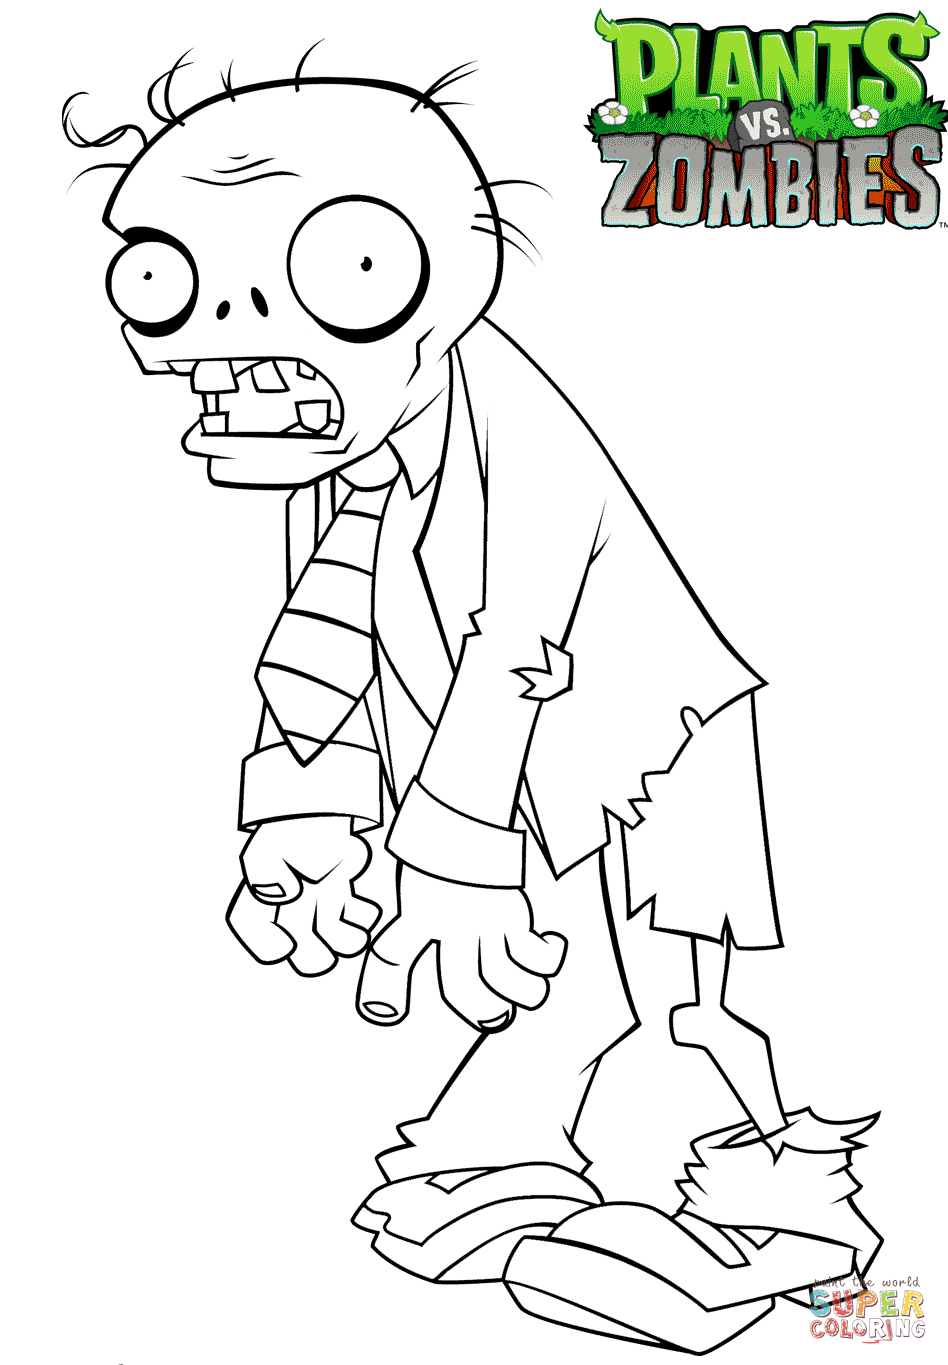 Plants vs. Zombies coloring page | Free Printable Coloring Pages